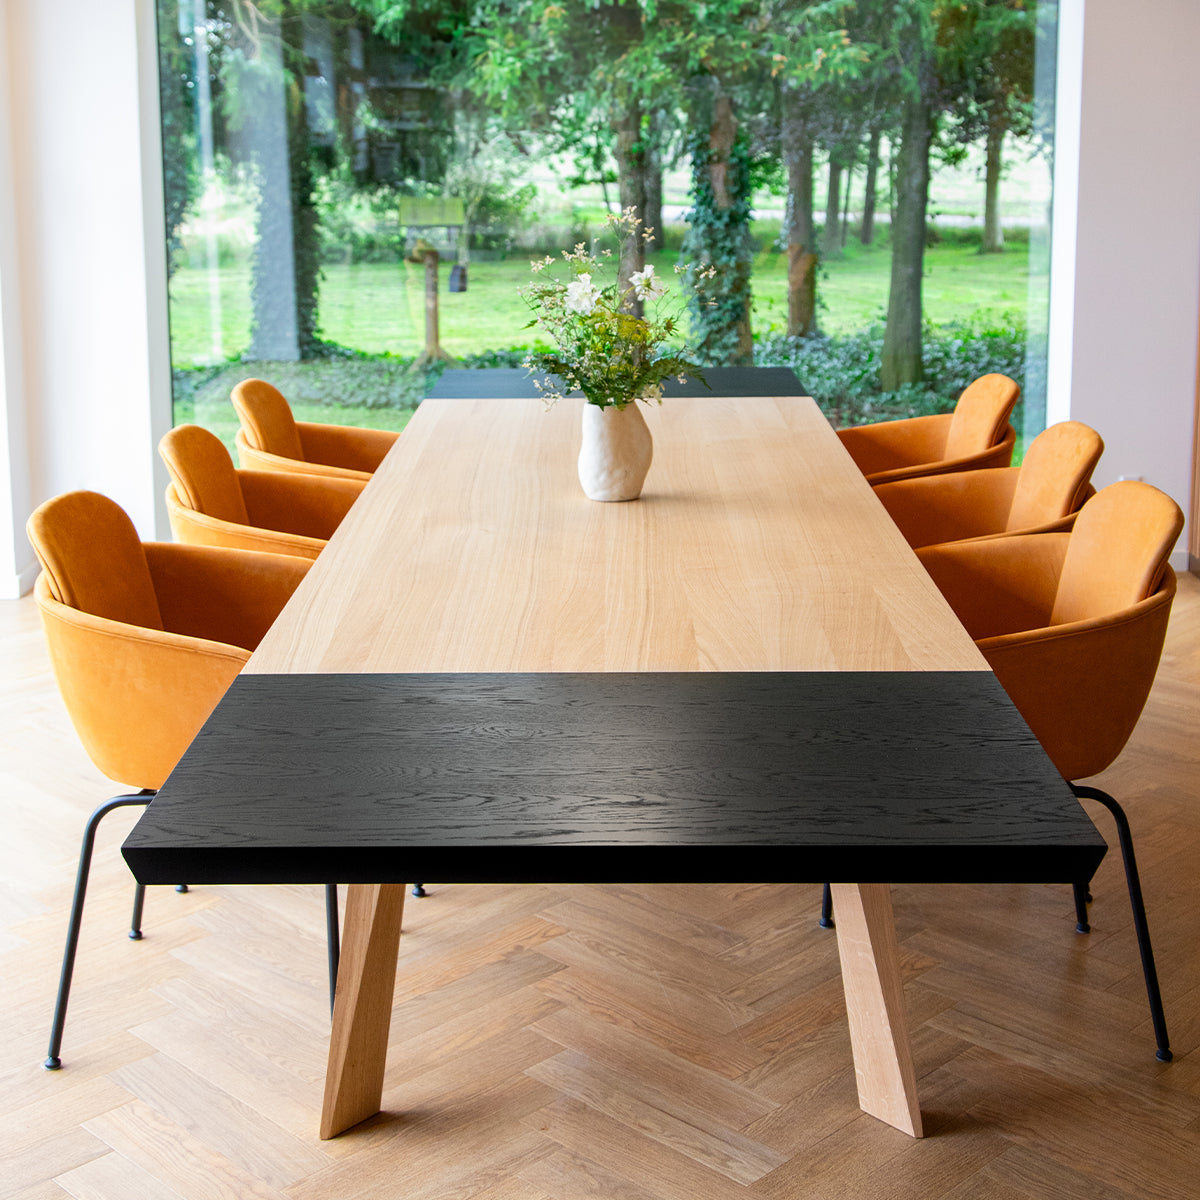 Edge Dining Table - Extension Leaf